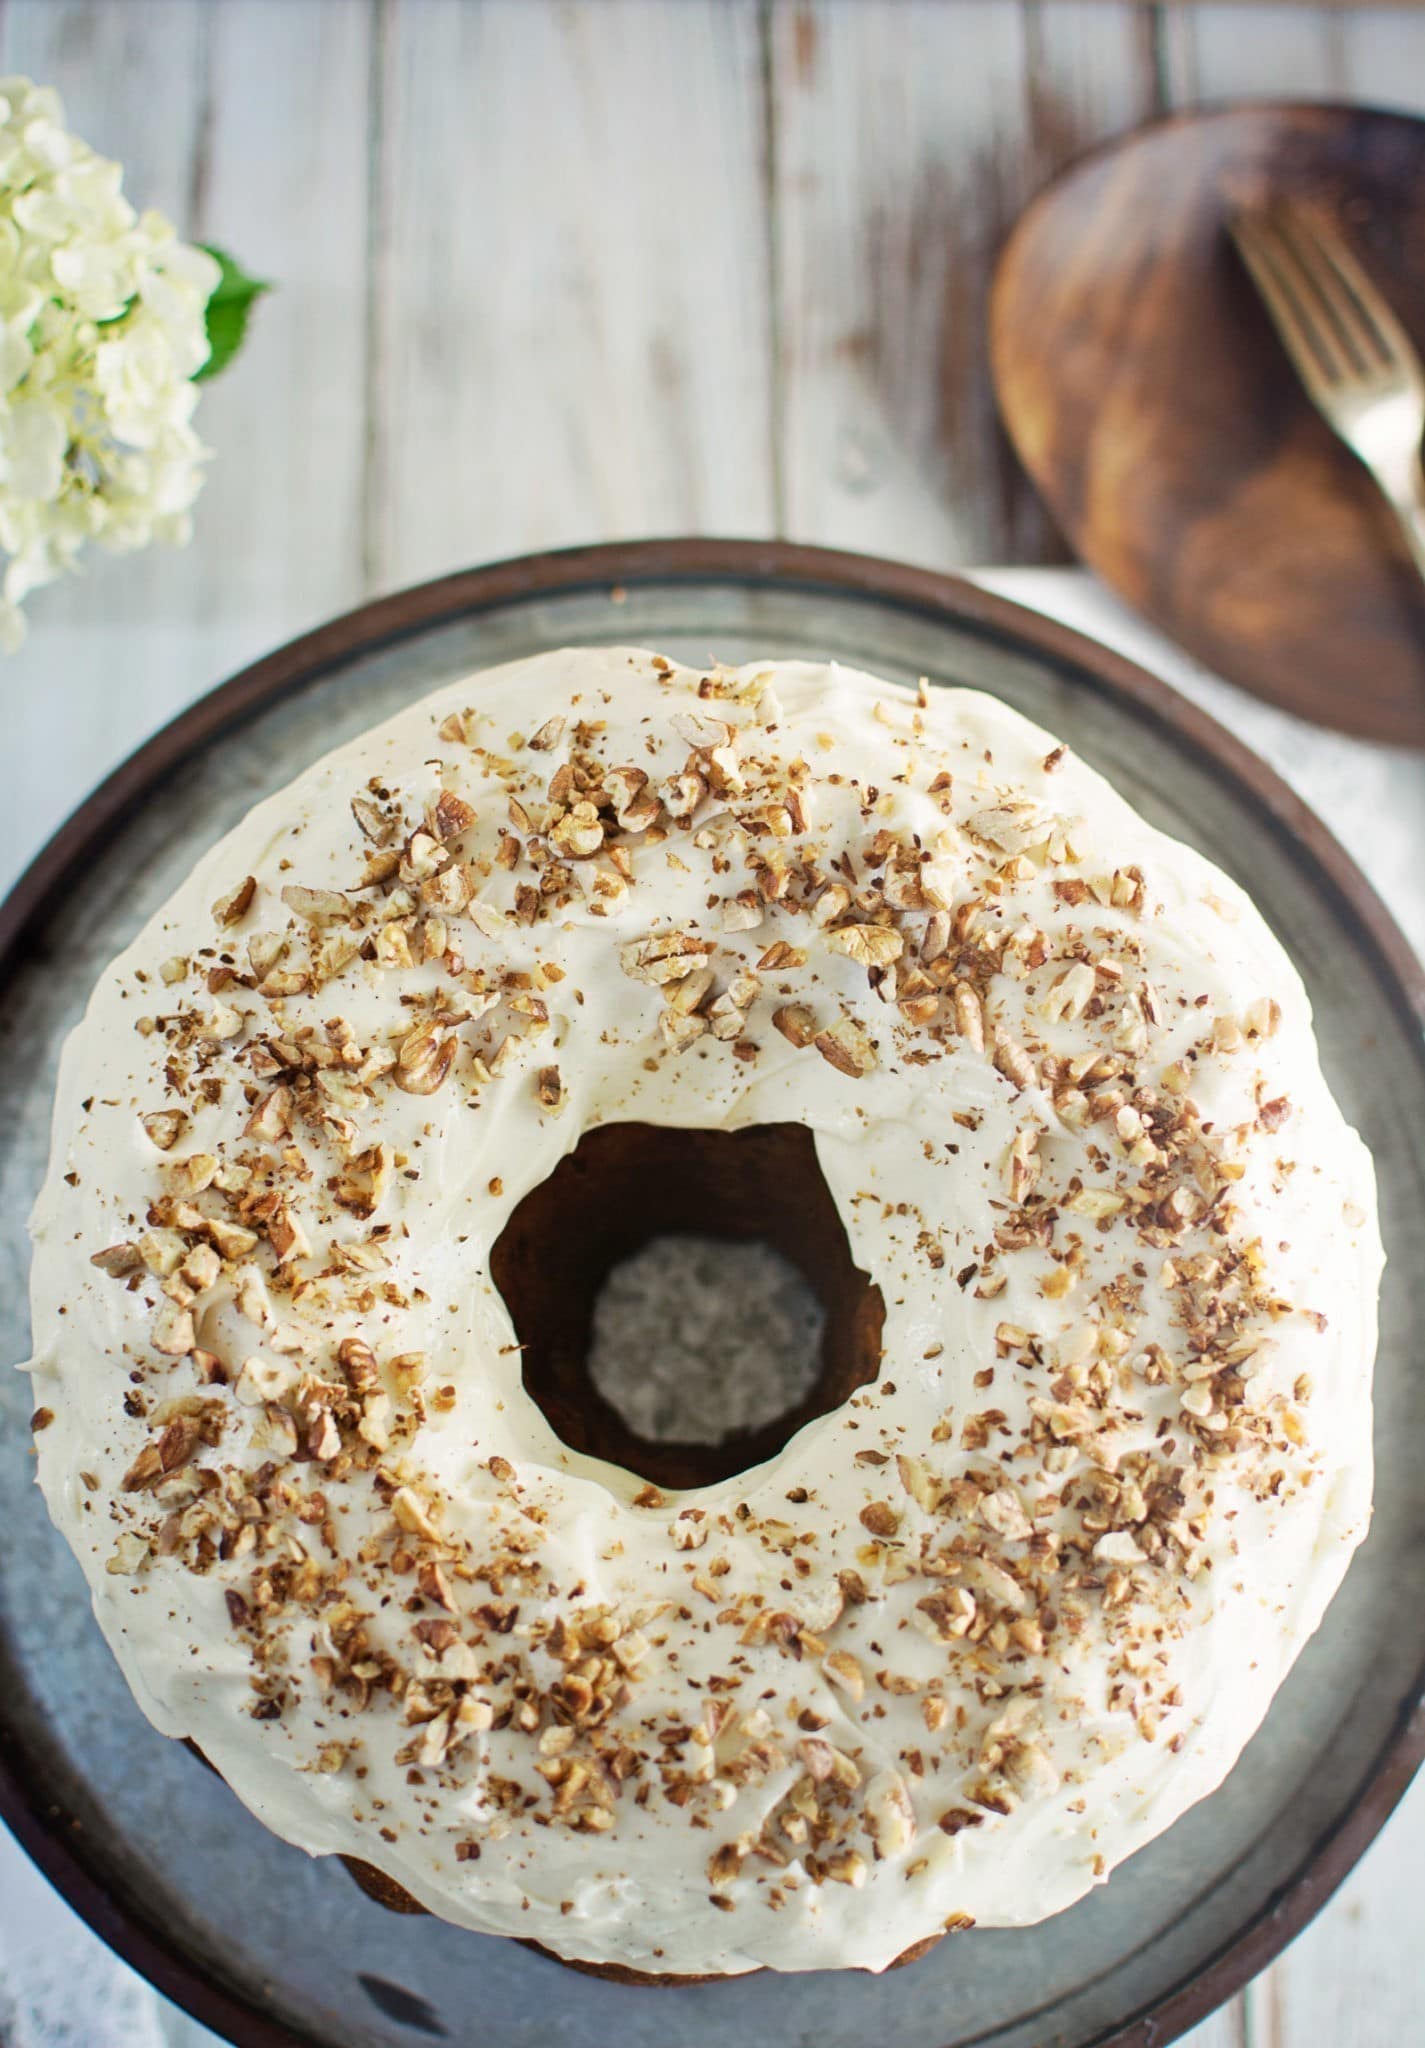 Hummingbird Cake - A gorgeous cake full of Pineapple, Bananas and Pecans topped off with a fluffy Cream Cheese Frosting - recipe @LittleFiggyFood